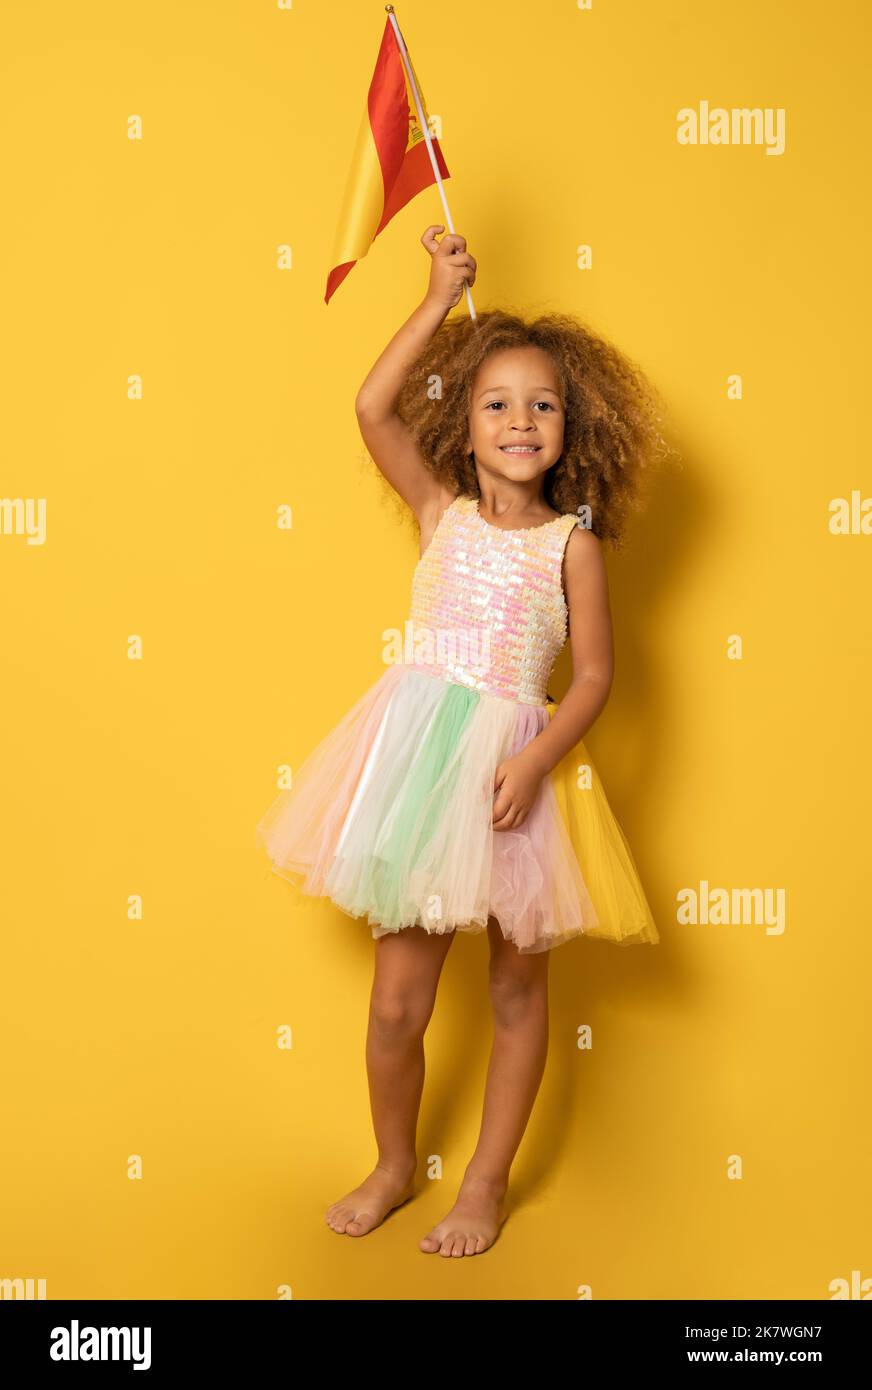 Cute little girl holding Spanish flag standing isolated over yellow background. Stock Photo